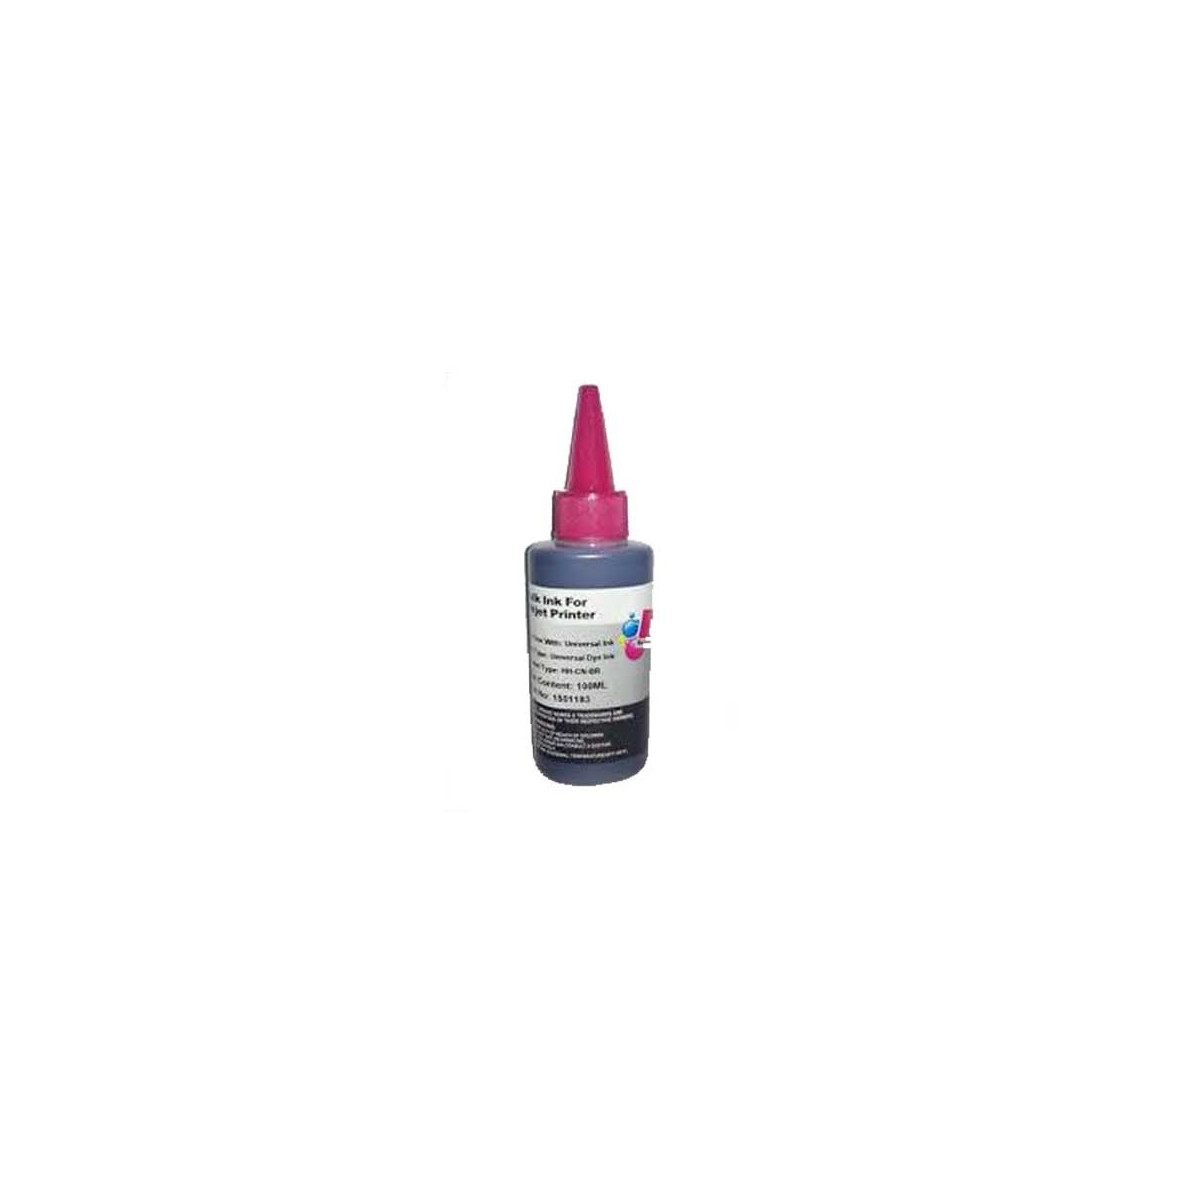 BOUTEILLE D'ENCRE ADAPTABLE UNIVERSELLE 100ML - MAGENTA